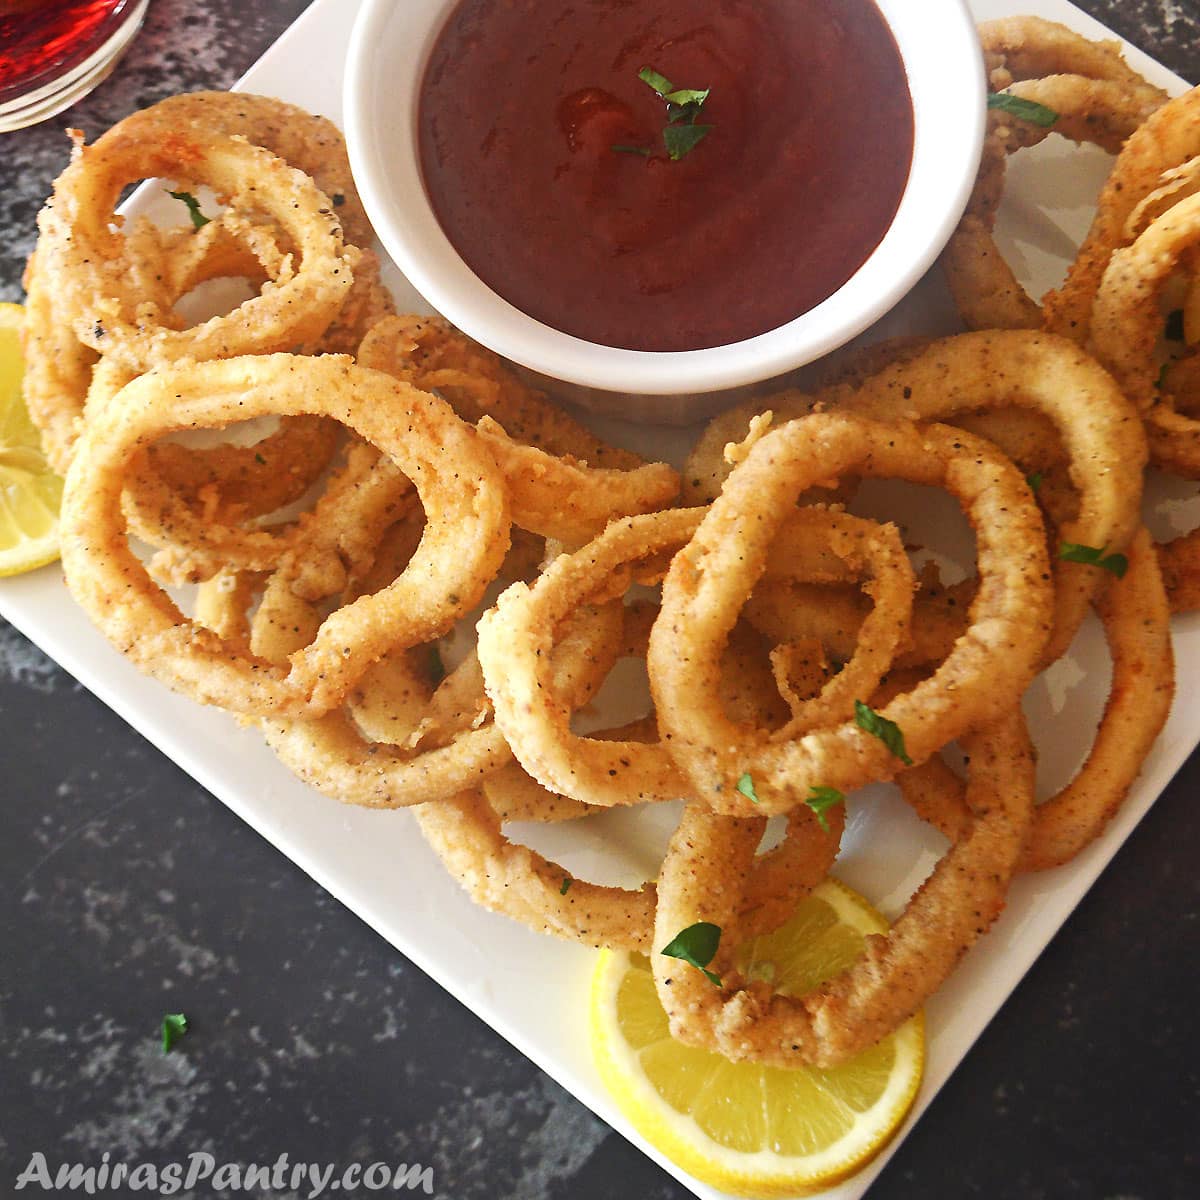 Fried calamari rings on a white serving plate with a bowl of sauce in the middle.